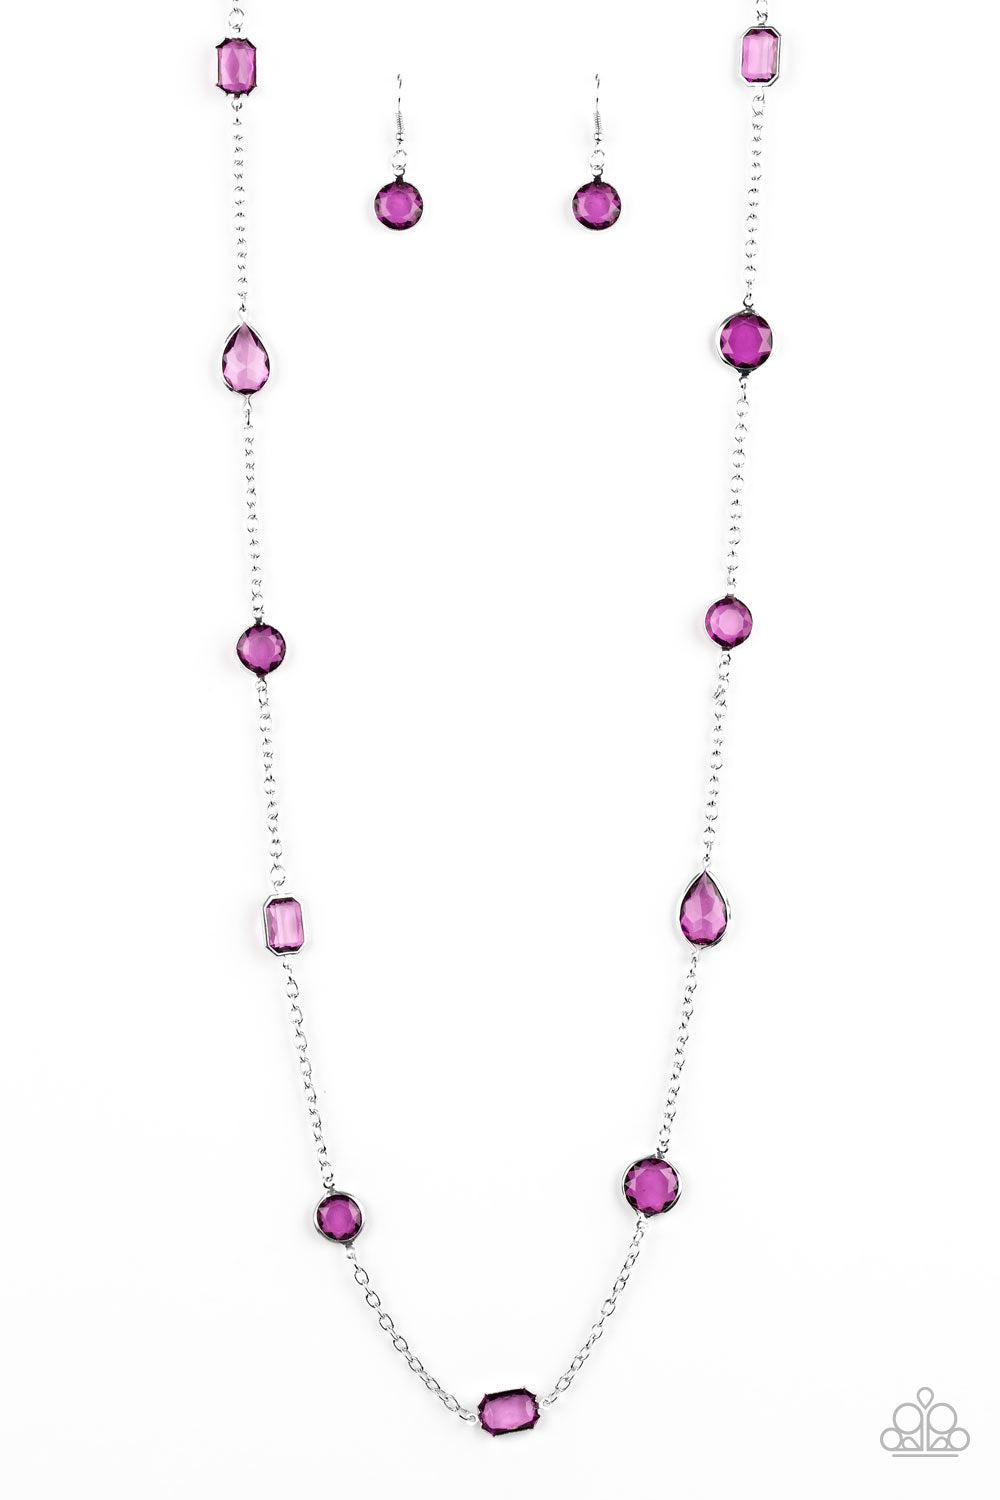 Glassy Glamorous Purple and Silver Necklace - Paparazzi Accessories - lightbox -CarasShop.com - $5 Jewelry by Cara Jewels